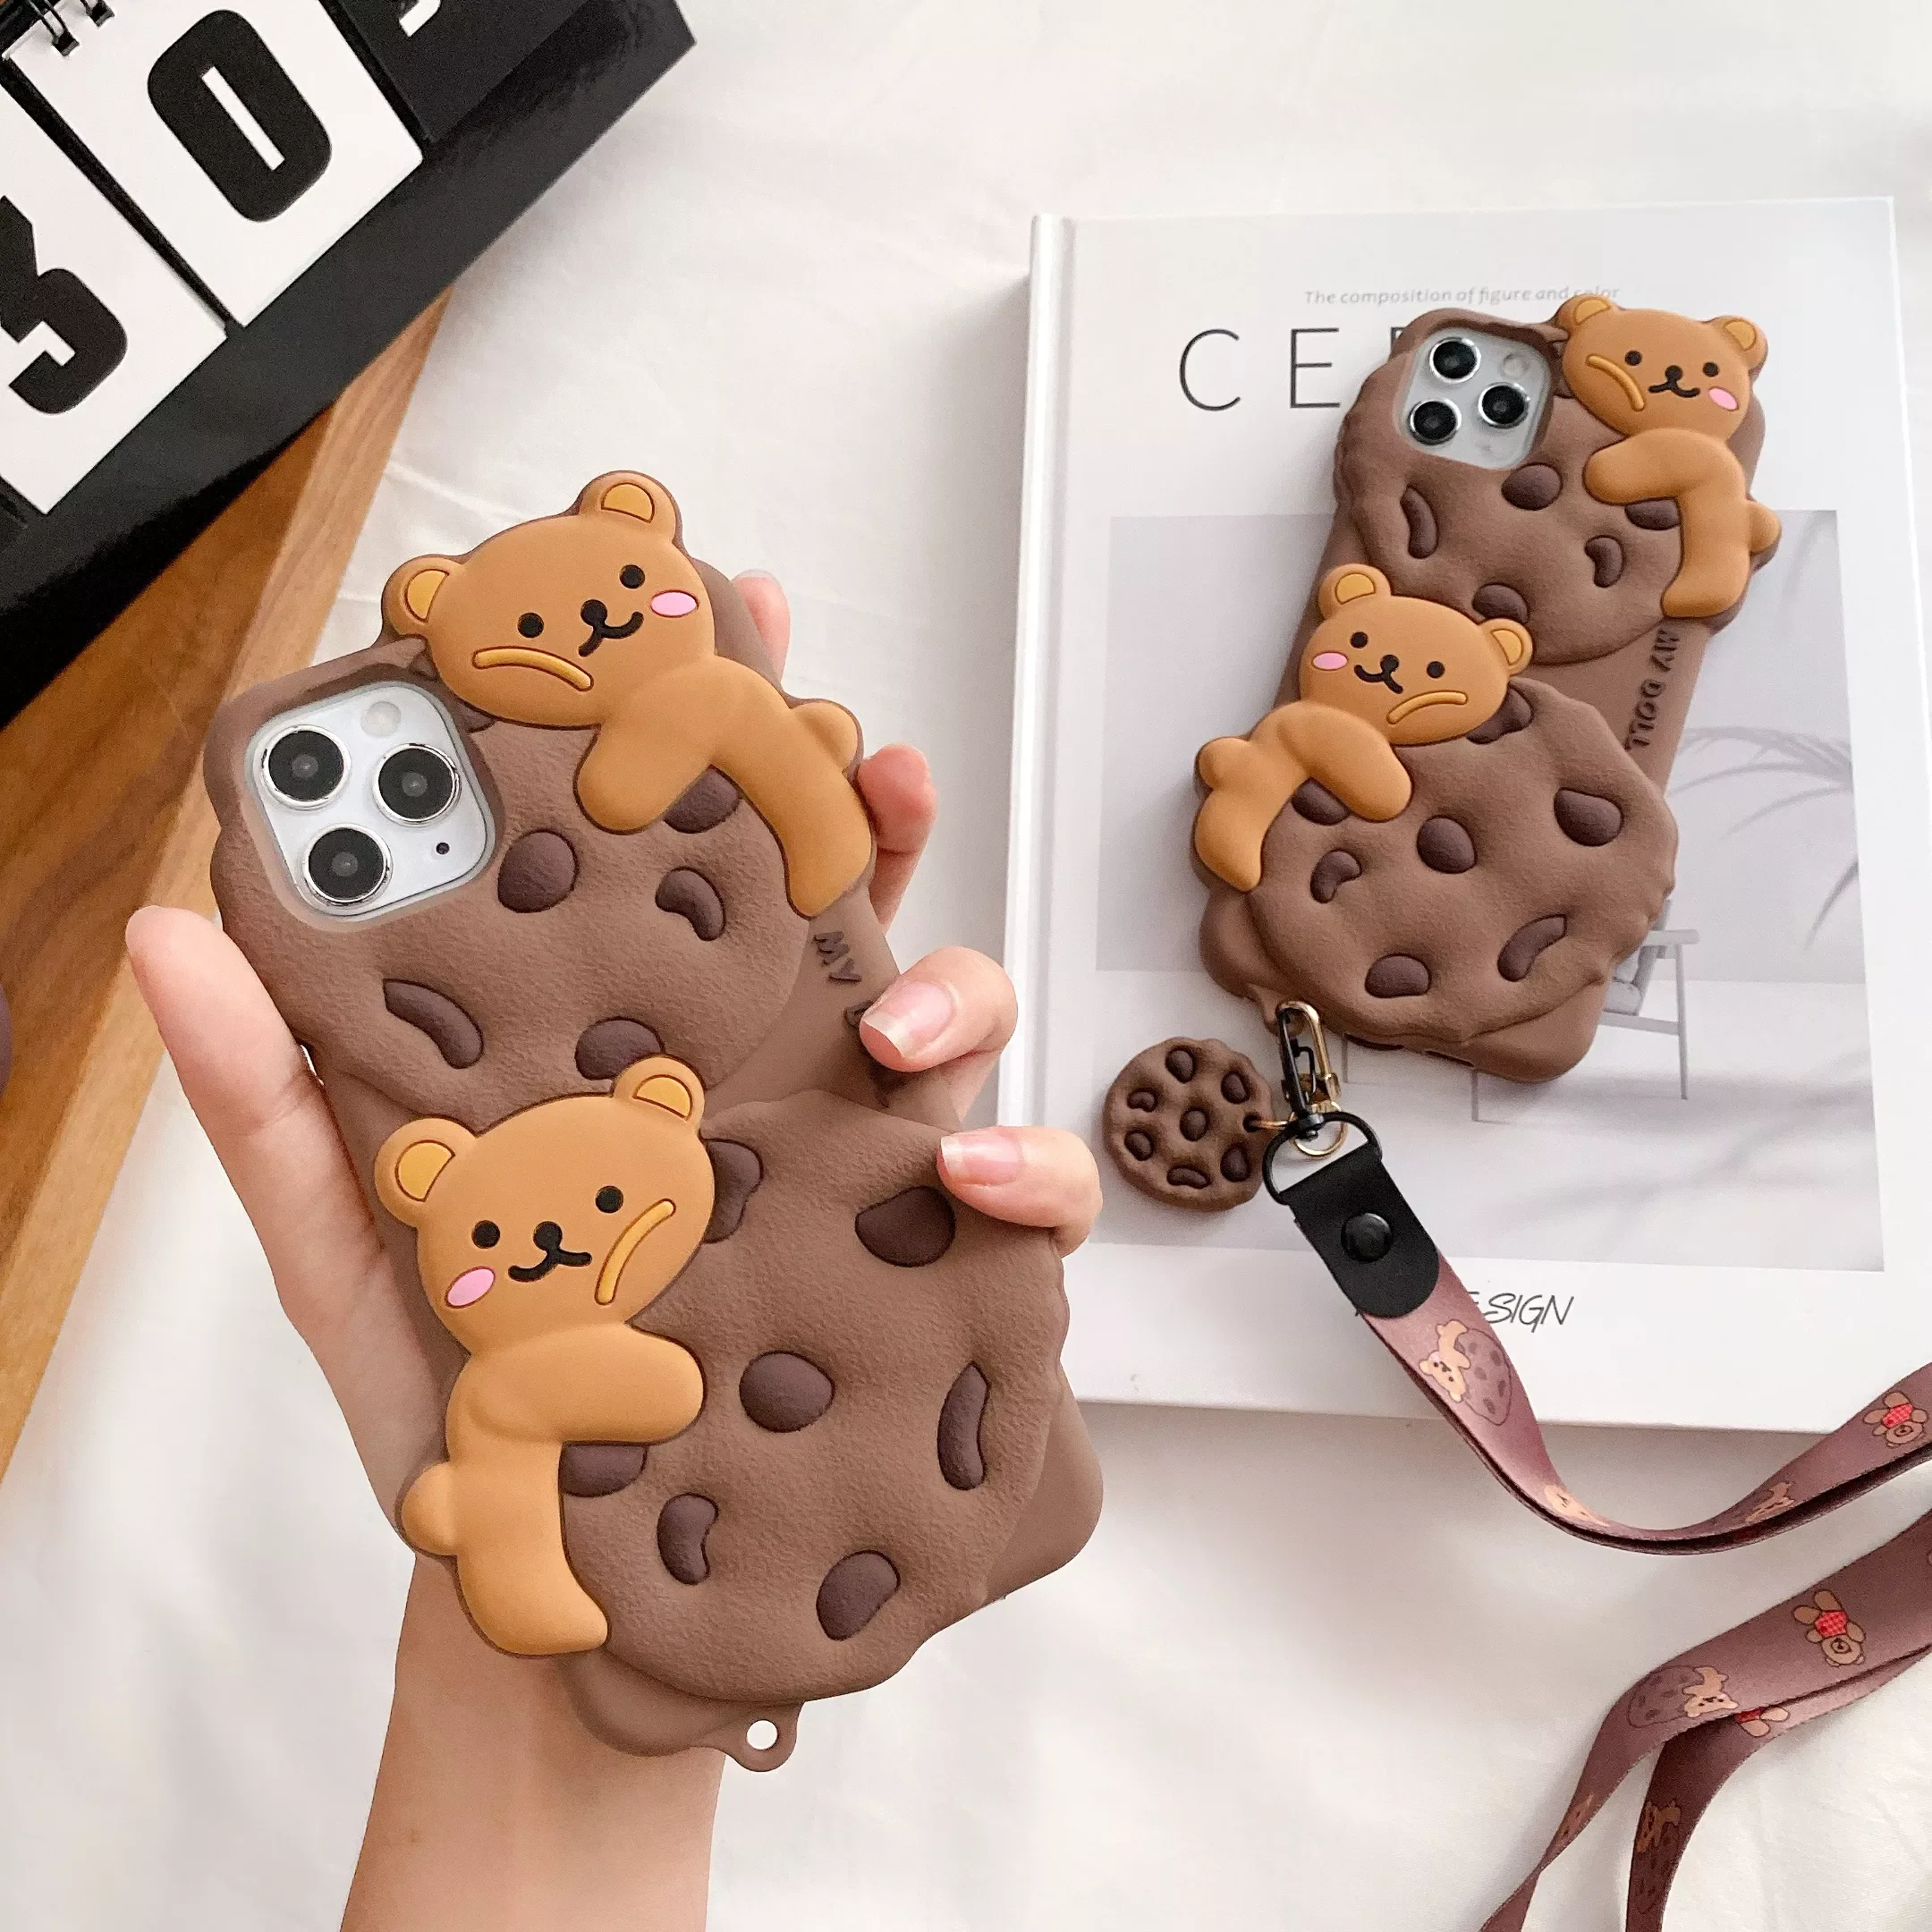 

3D Cute Cartoon Chocolate Cookie Bear Case for iPhone 12 Mini 11 Pro XS Max XR X 7 8 Biscuit Soft Silicone Lanyard Rope Cover